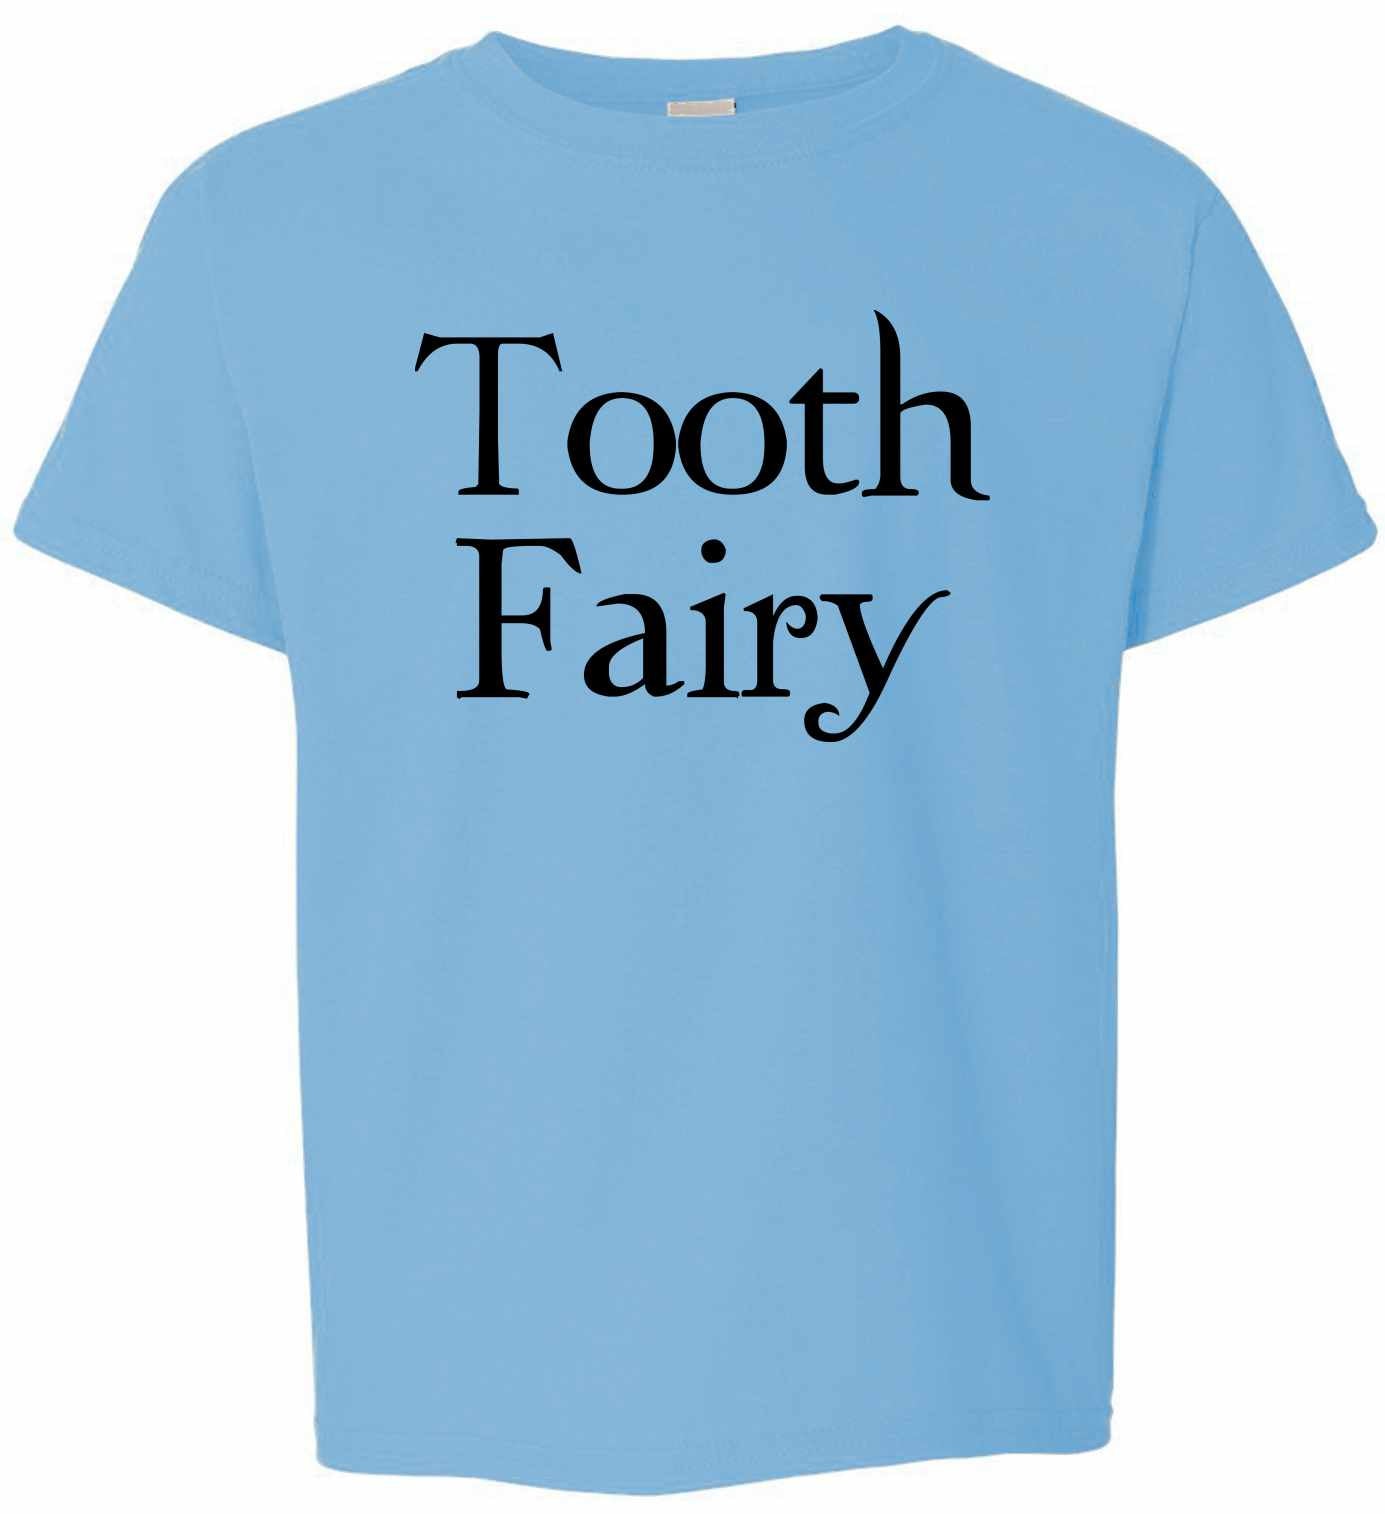 Tooth Fairy on Kids T-Shirt (#680-201)